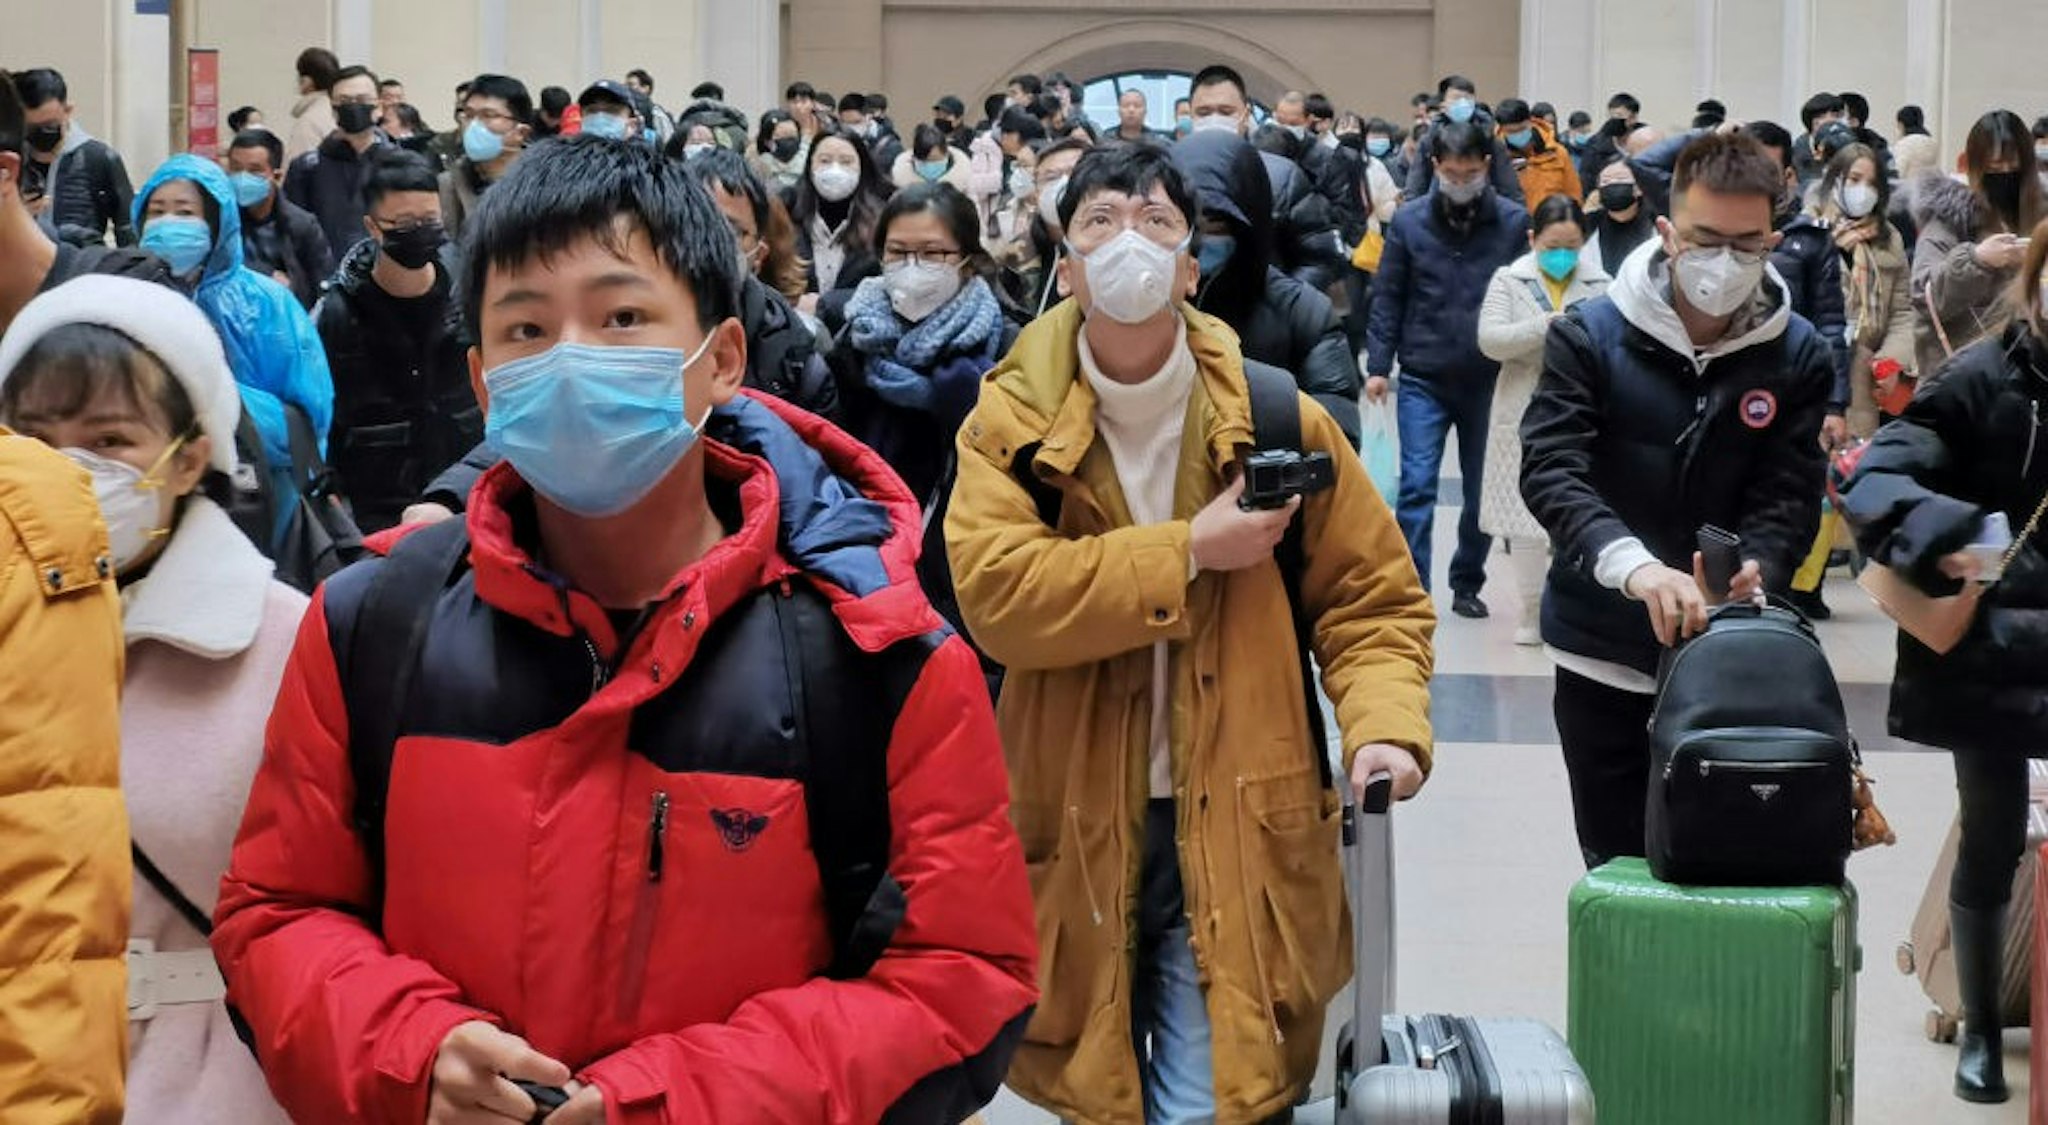 WUHAN, CHINA - JANUARY 22: People wear face masks as they wait at Hankou Railway Station on January 22, 2020 in Wuhan, China. A new infectious coronavirus known as "2019-nCoV" was discovered in Wuhan last week. Health officials stepped up efforts to contain the spread of the pneumonia-like disease which medical experts confirmed can be passed from human to human. Cases have been reported in other countries including the United States,Thailand, Japan, Taiwan, and South Korea. It is reported that Wuhan will suspend all public transportation at 10 AM on January 23, 2020.